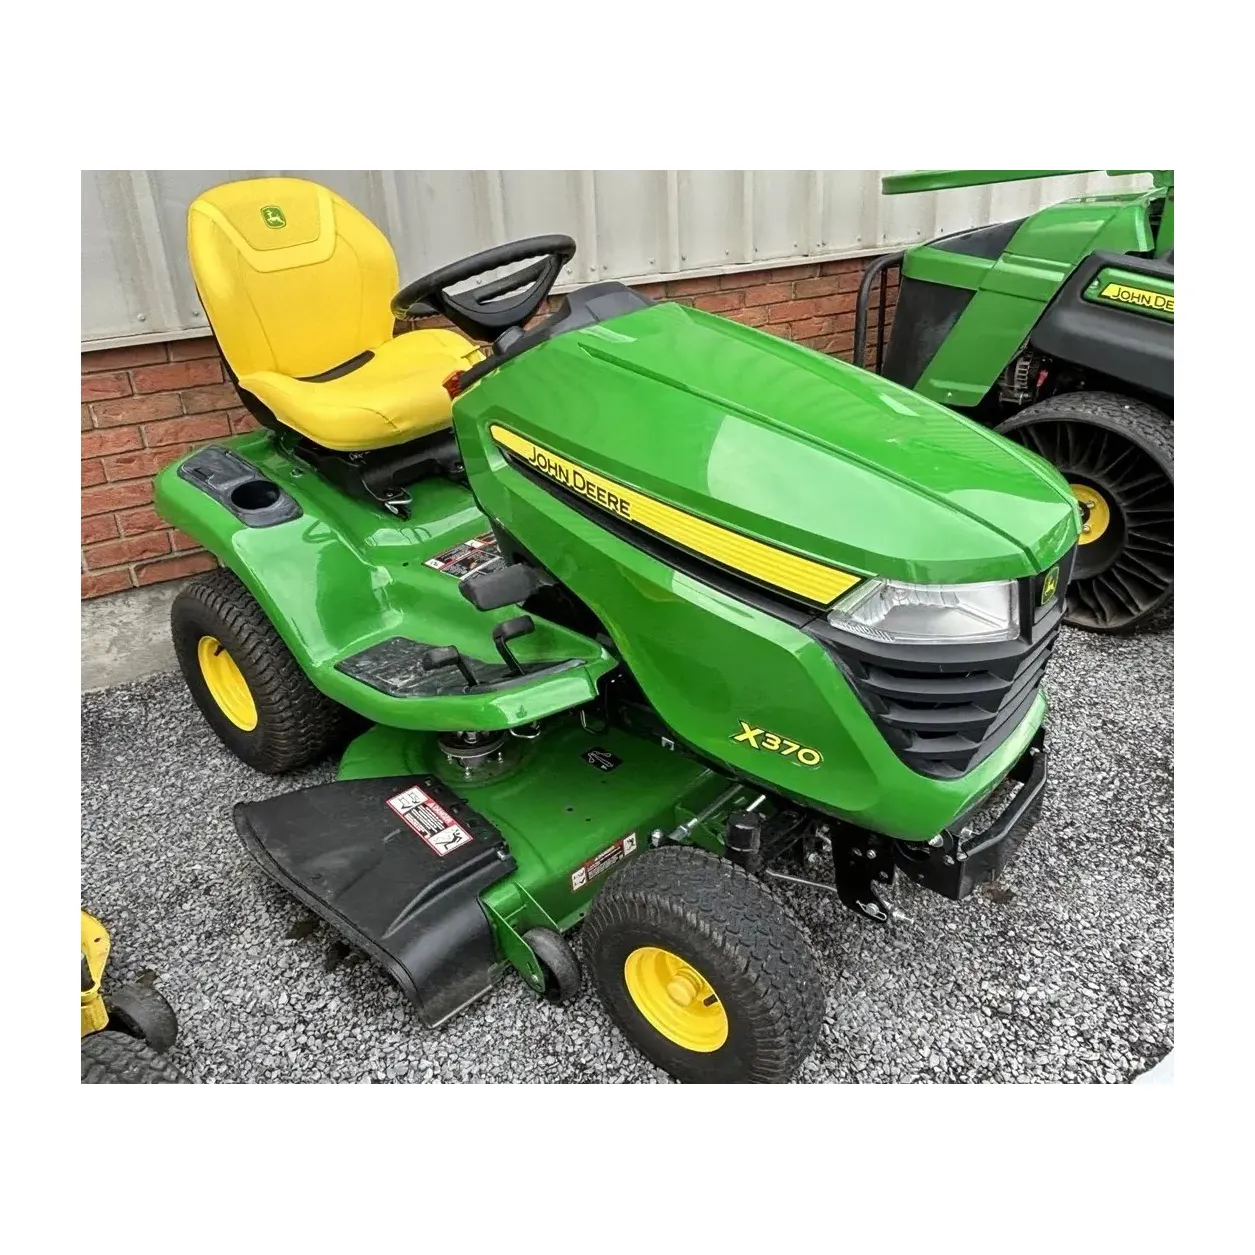 High Quality Lawn Mower X380 For Sale Used Lawn Mower for sale John Deer 20hp 21hp 50 Inch Zero Turn Riding Lawn Mower